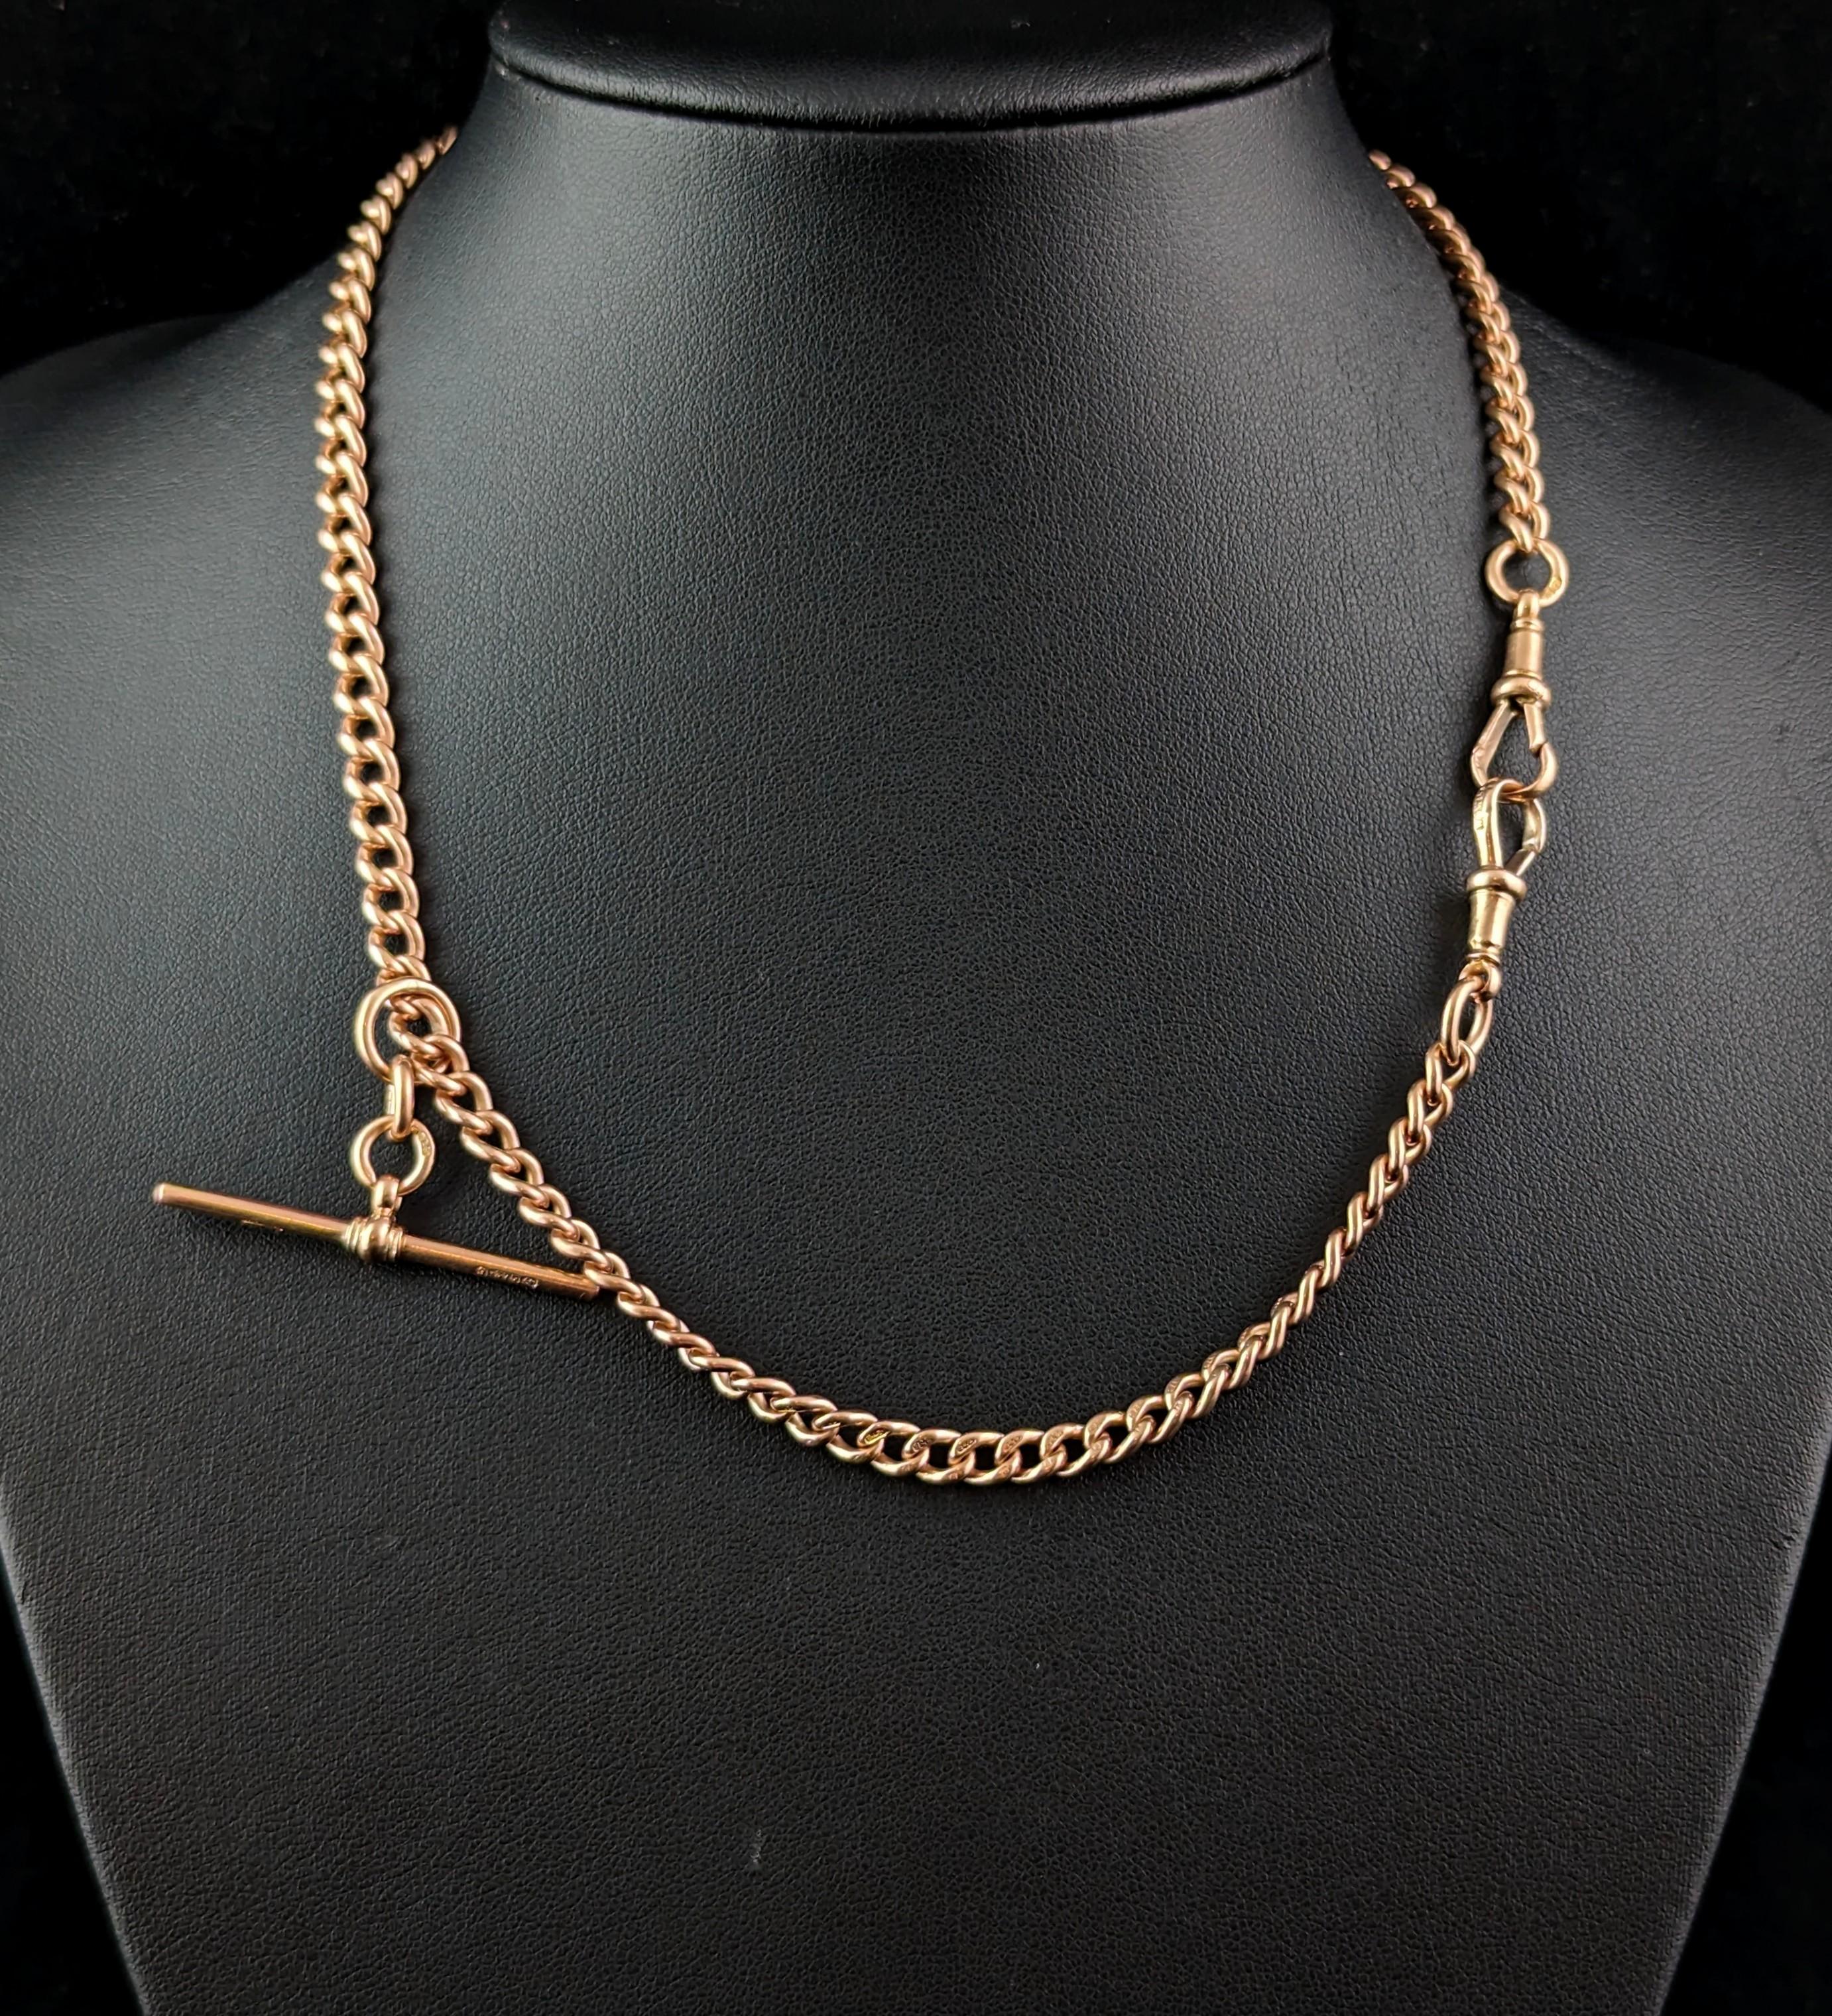 This magnificent antique 9ct rose gold Albert chain really has it all.

A lovely curb link chain in a warm Rose gold, each link individually stamped for 9ct gold, 9.375.

A double Albert with a uniform curb link it fastens with double gold dog clips